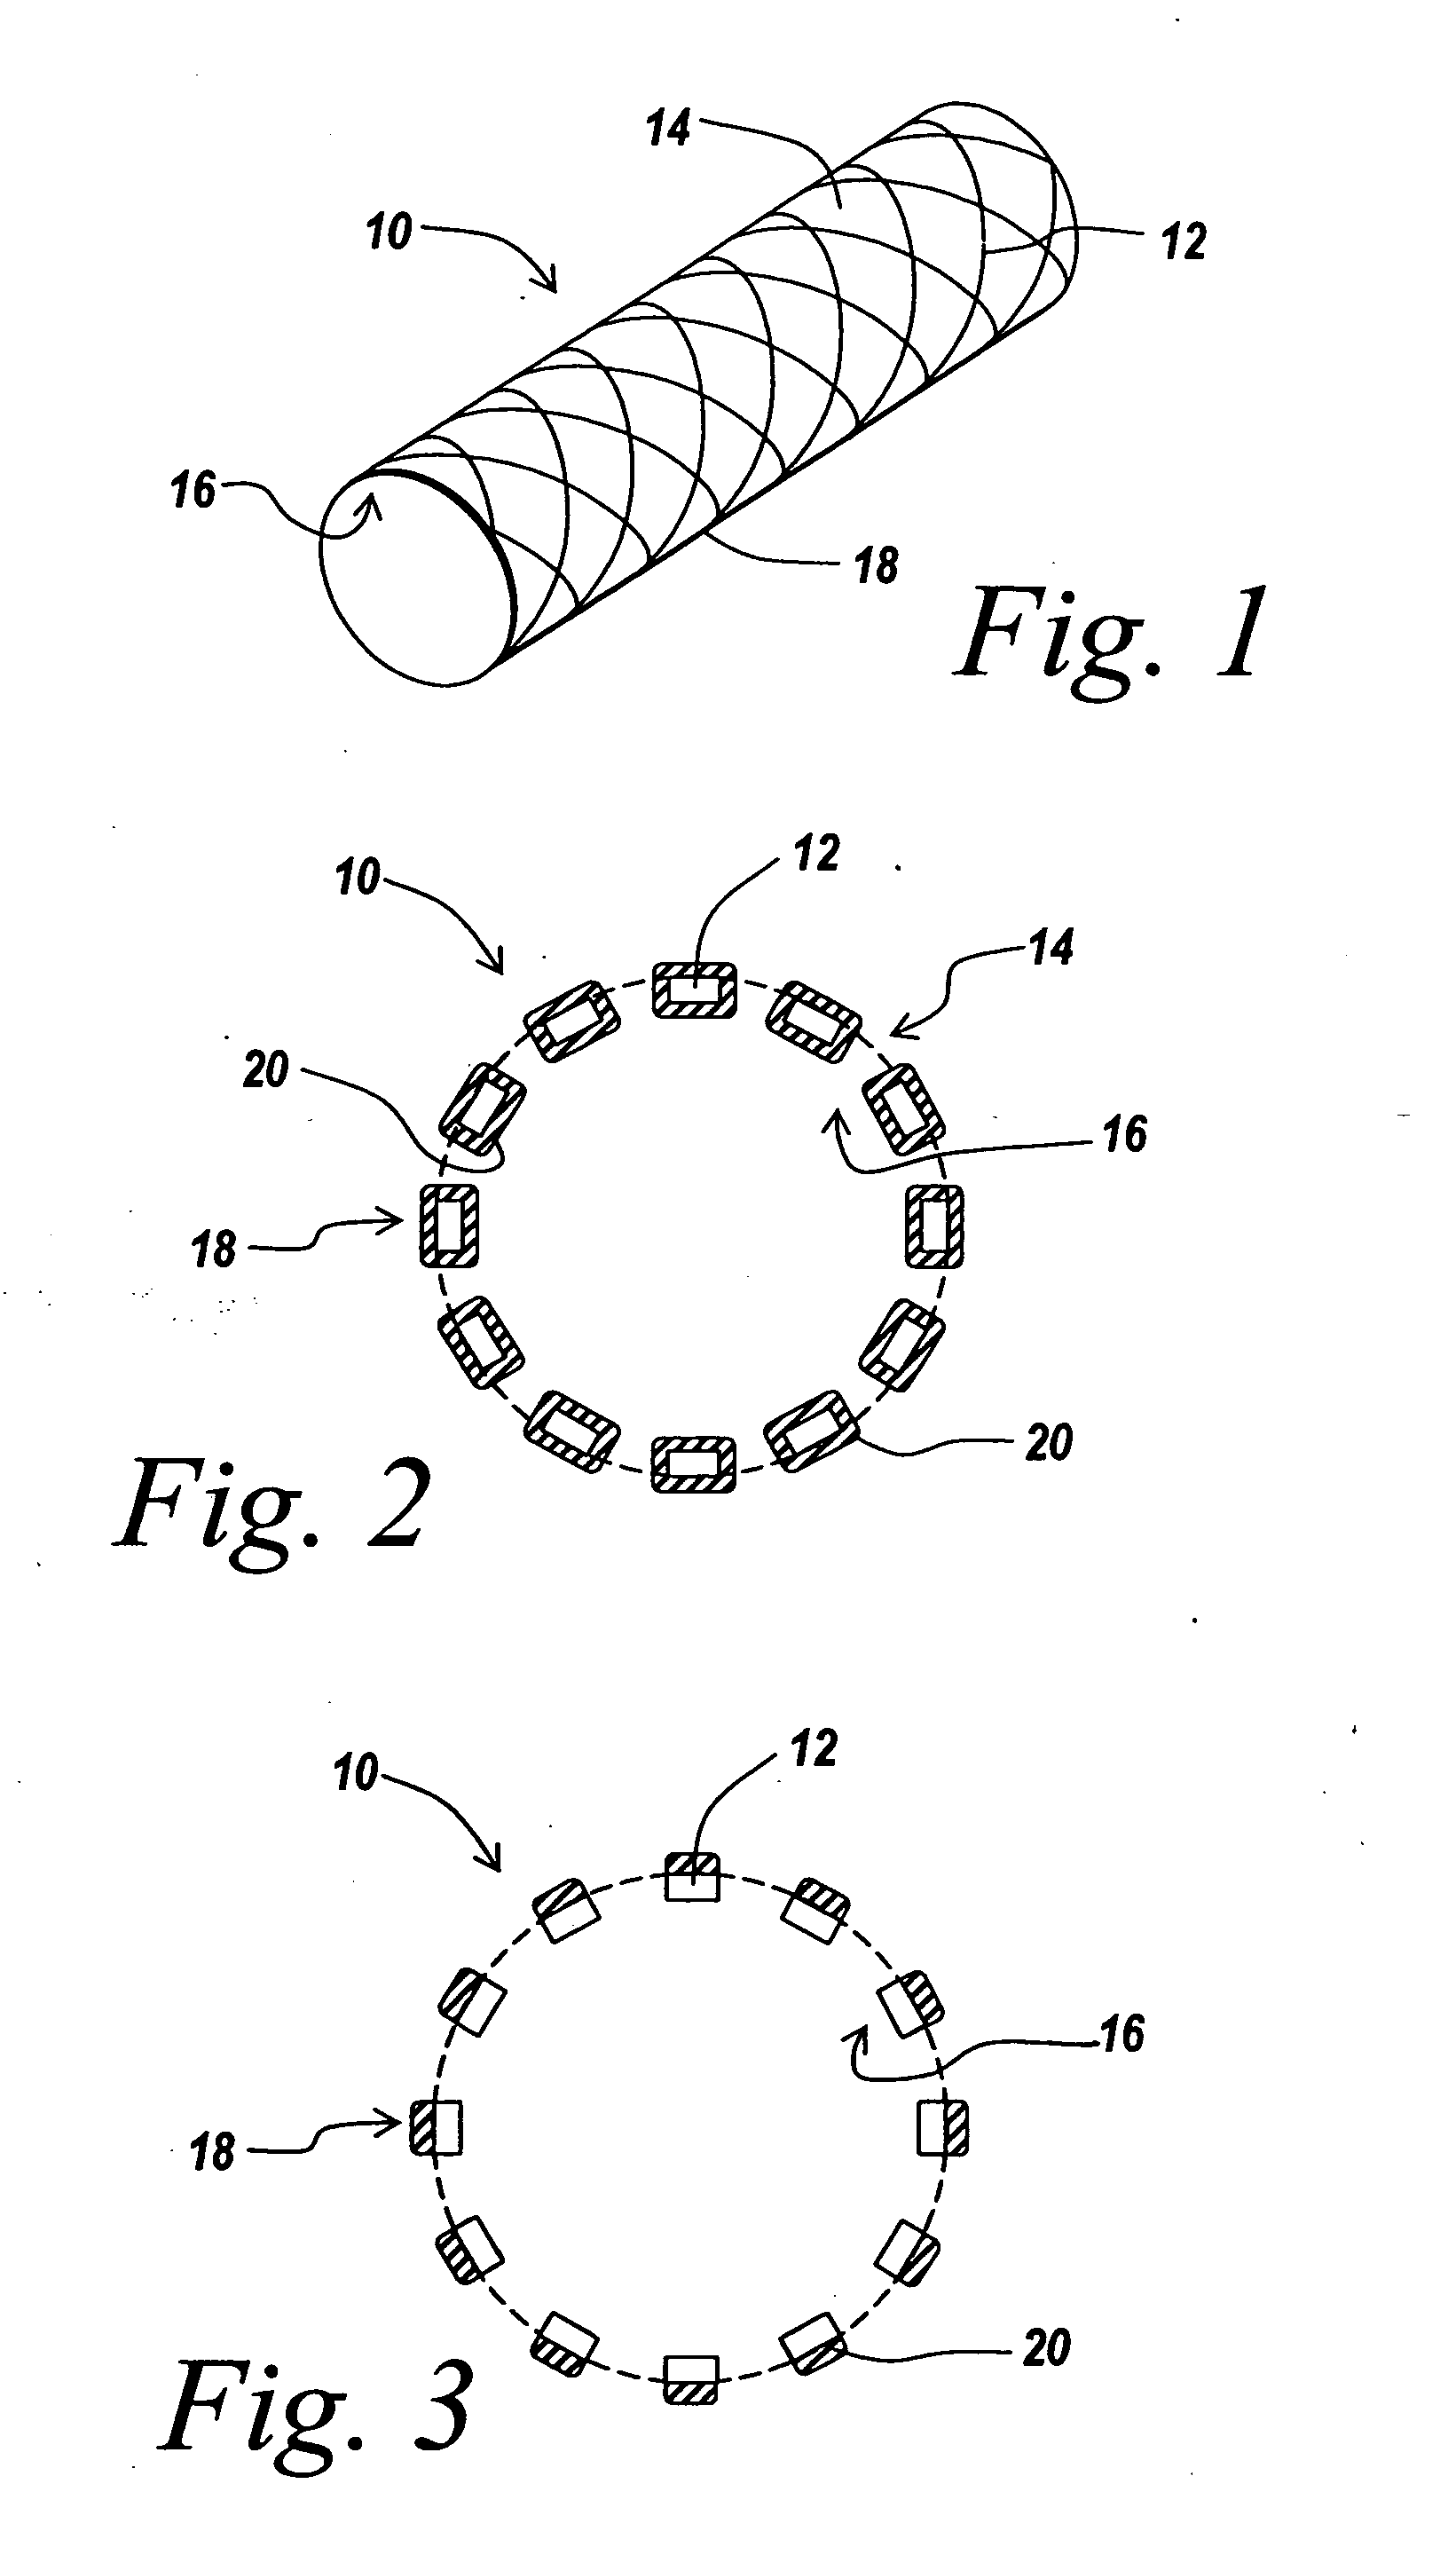 Pre-dried drug delivery coating for use with a stent